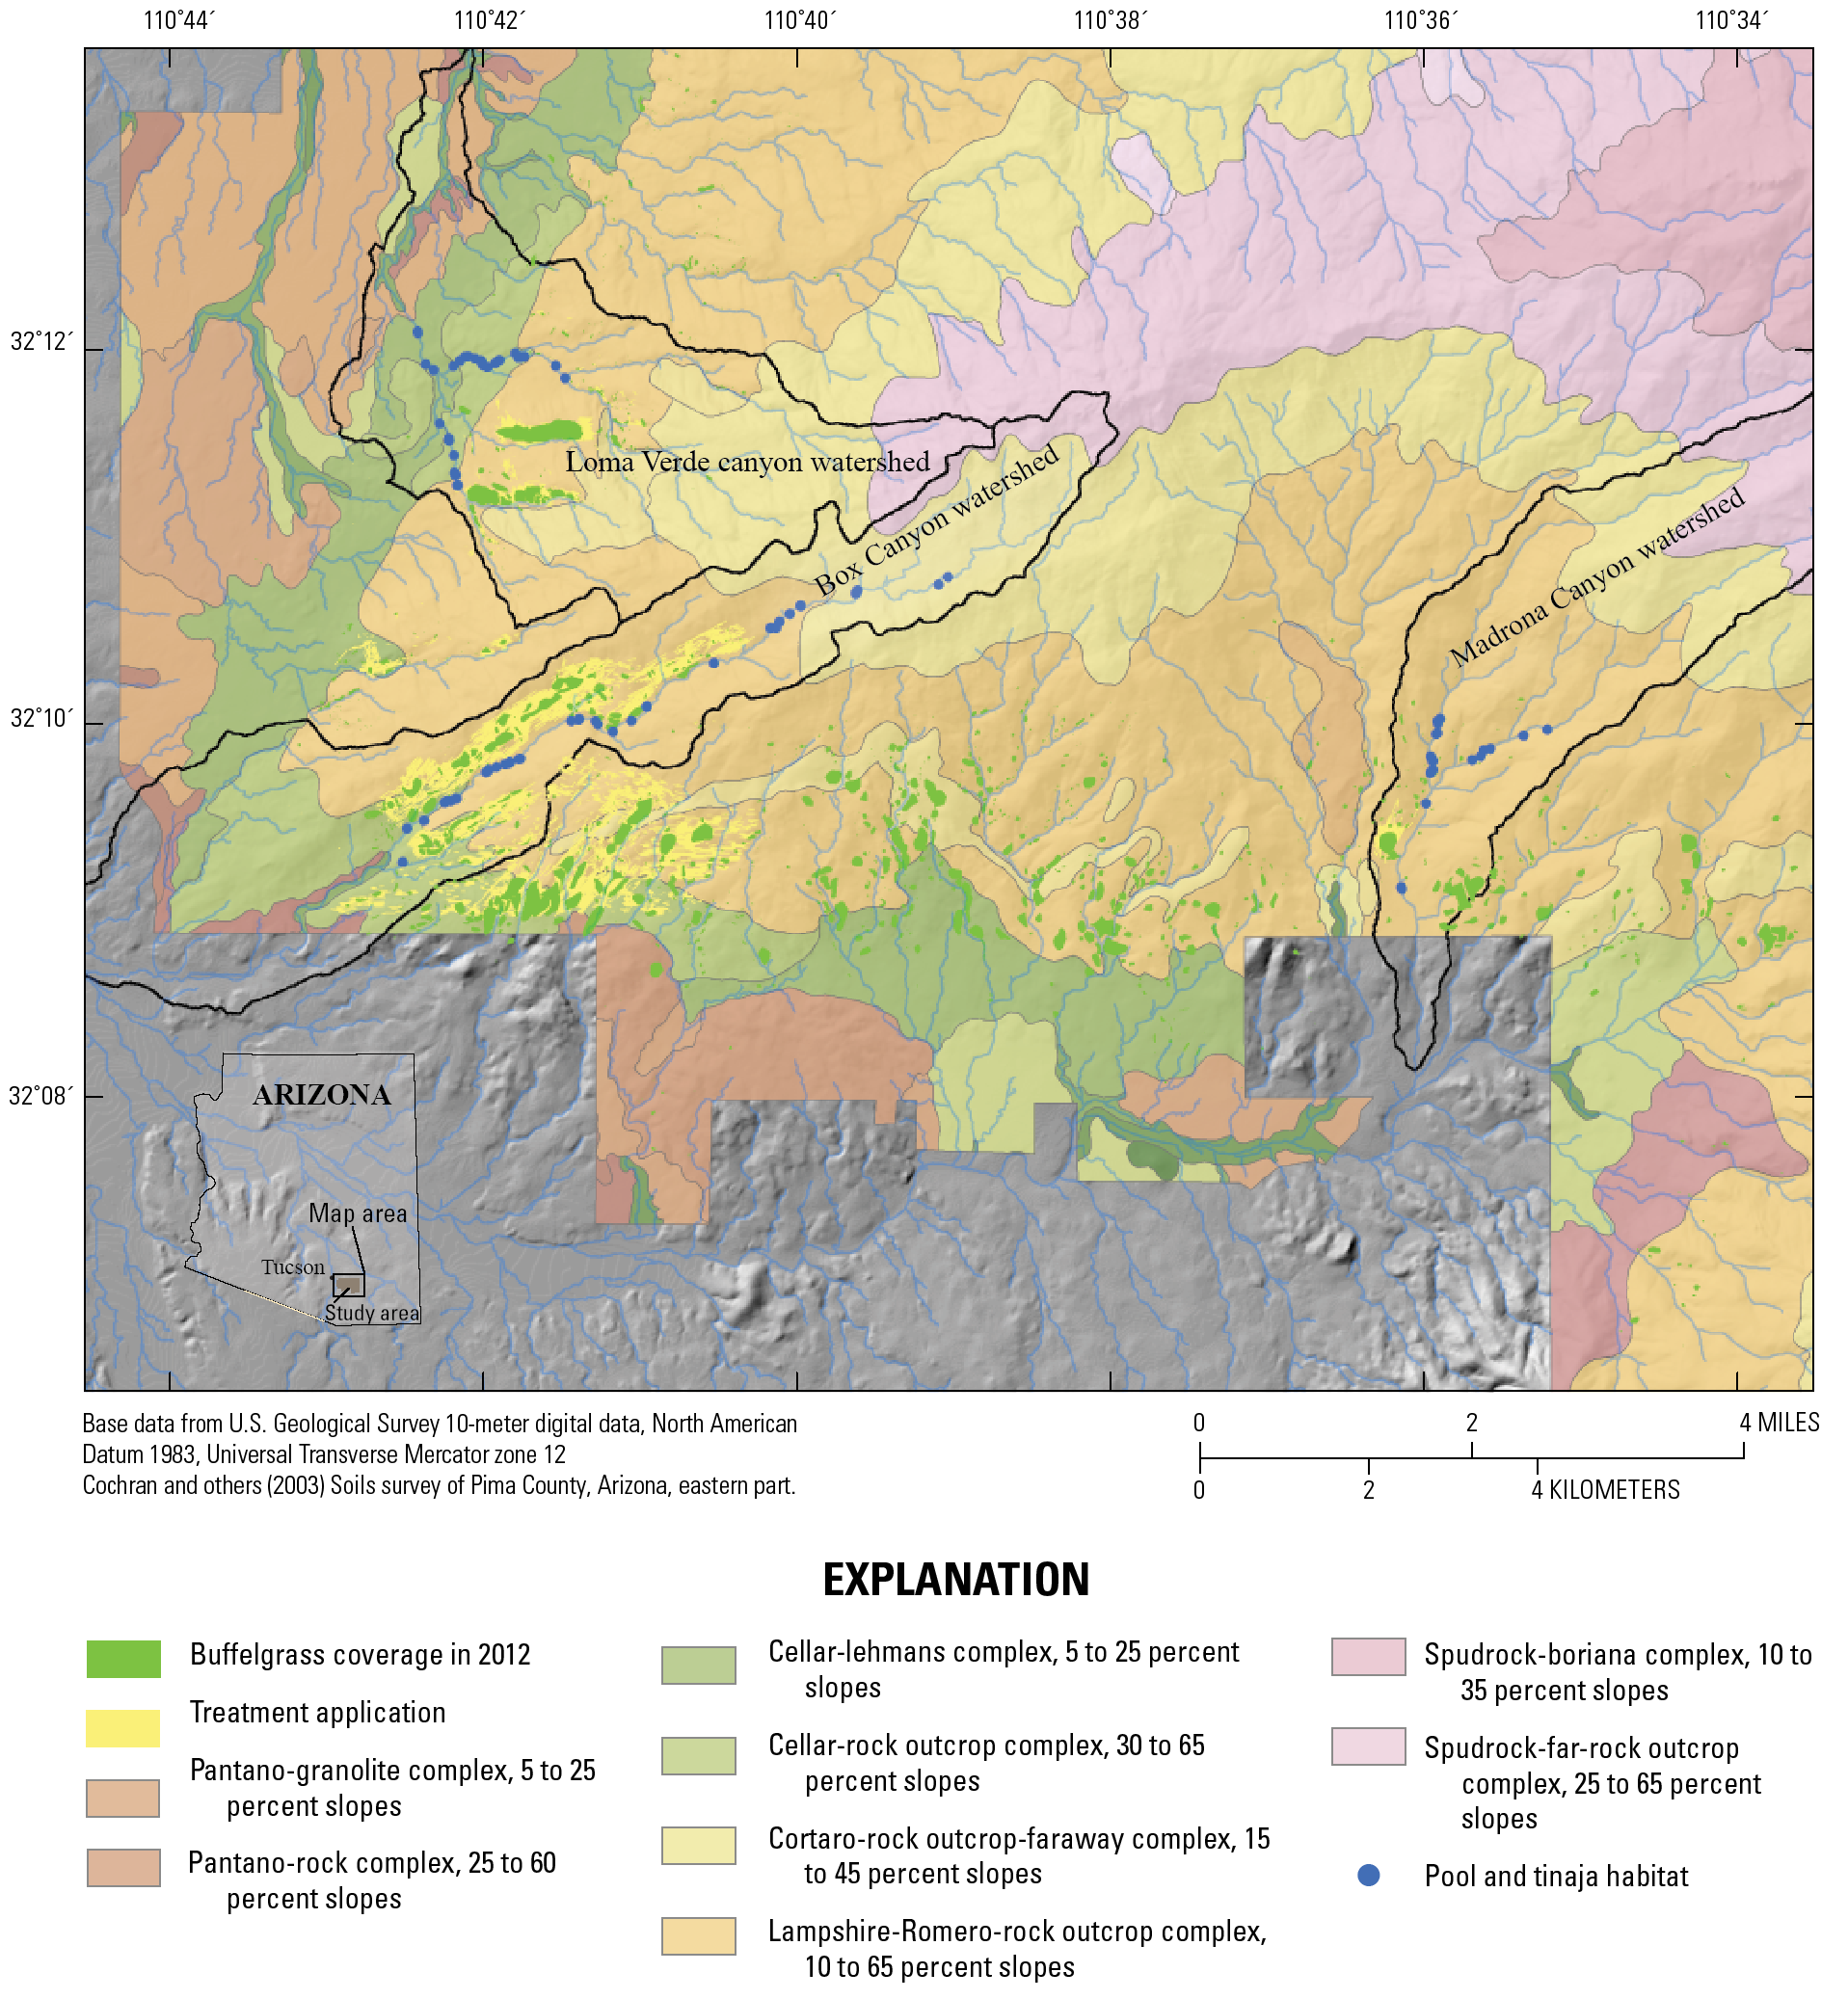 Map of Saguaro National Park-Rincon Mountain District with Pima County soil classifications,
                        treatment application, buffelgrass coverage from 2012